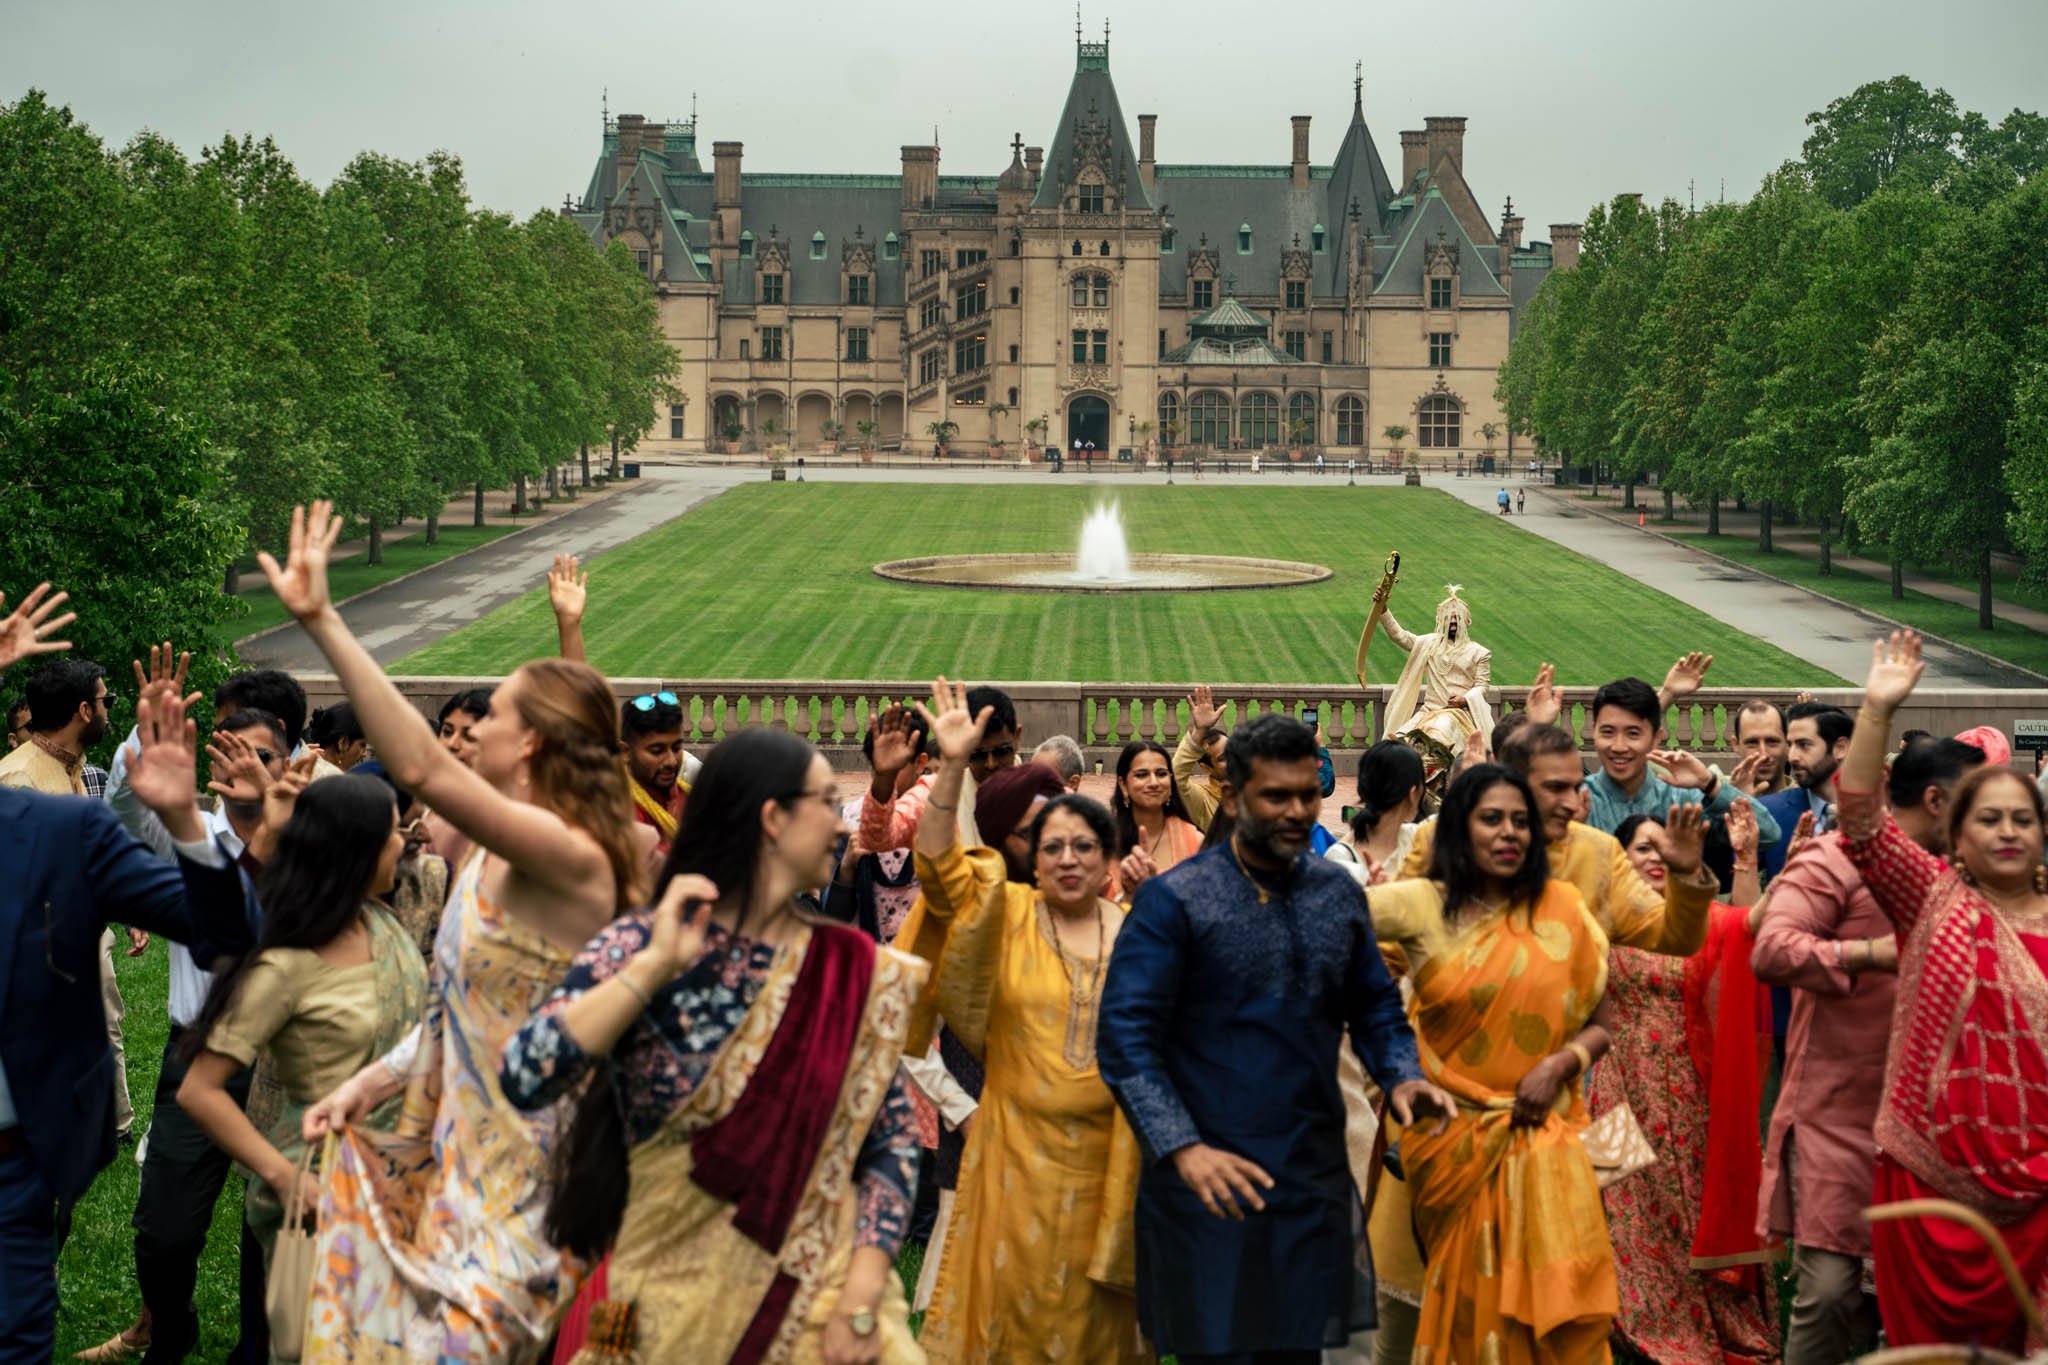 A group of people dancing in front of the Biltmore Estate.